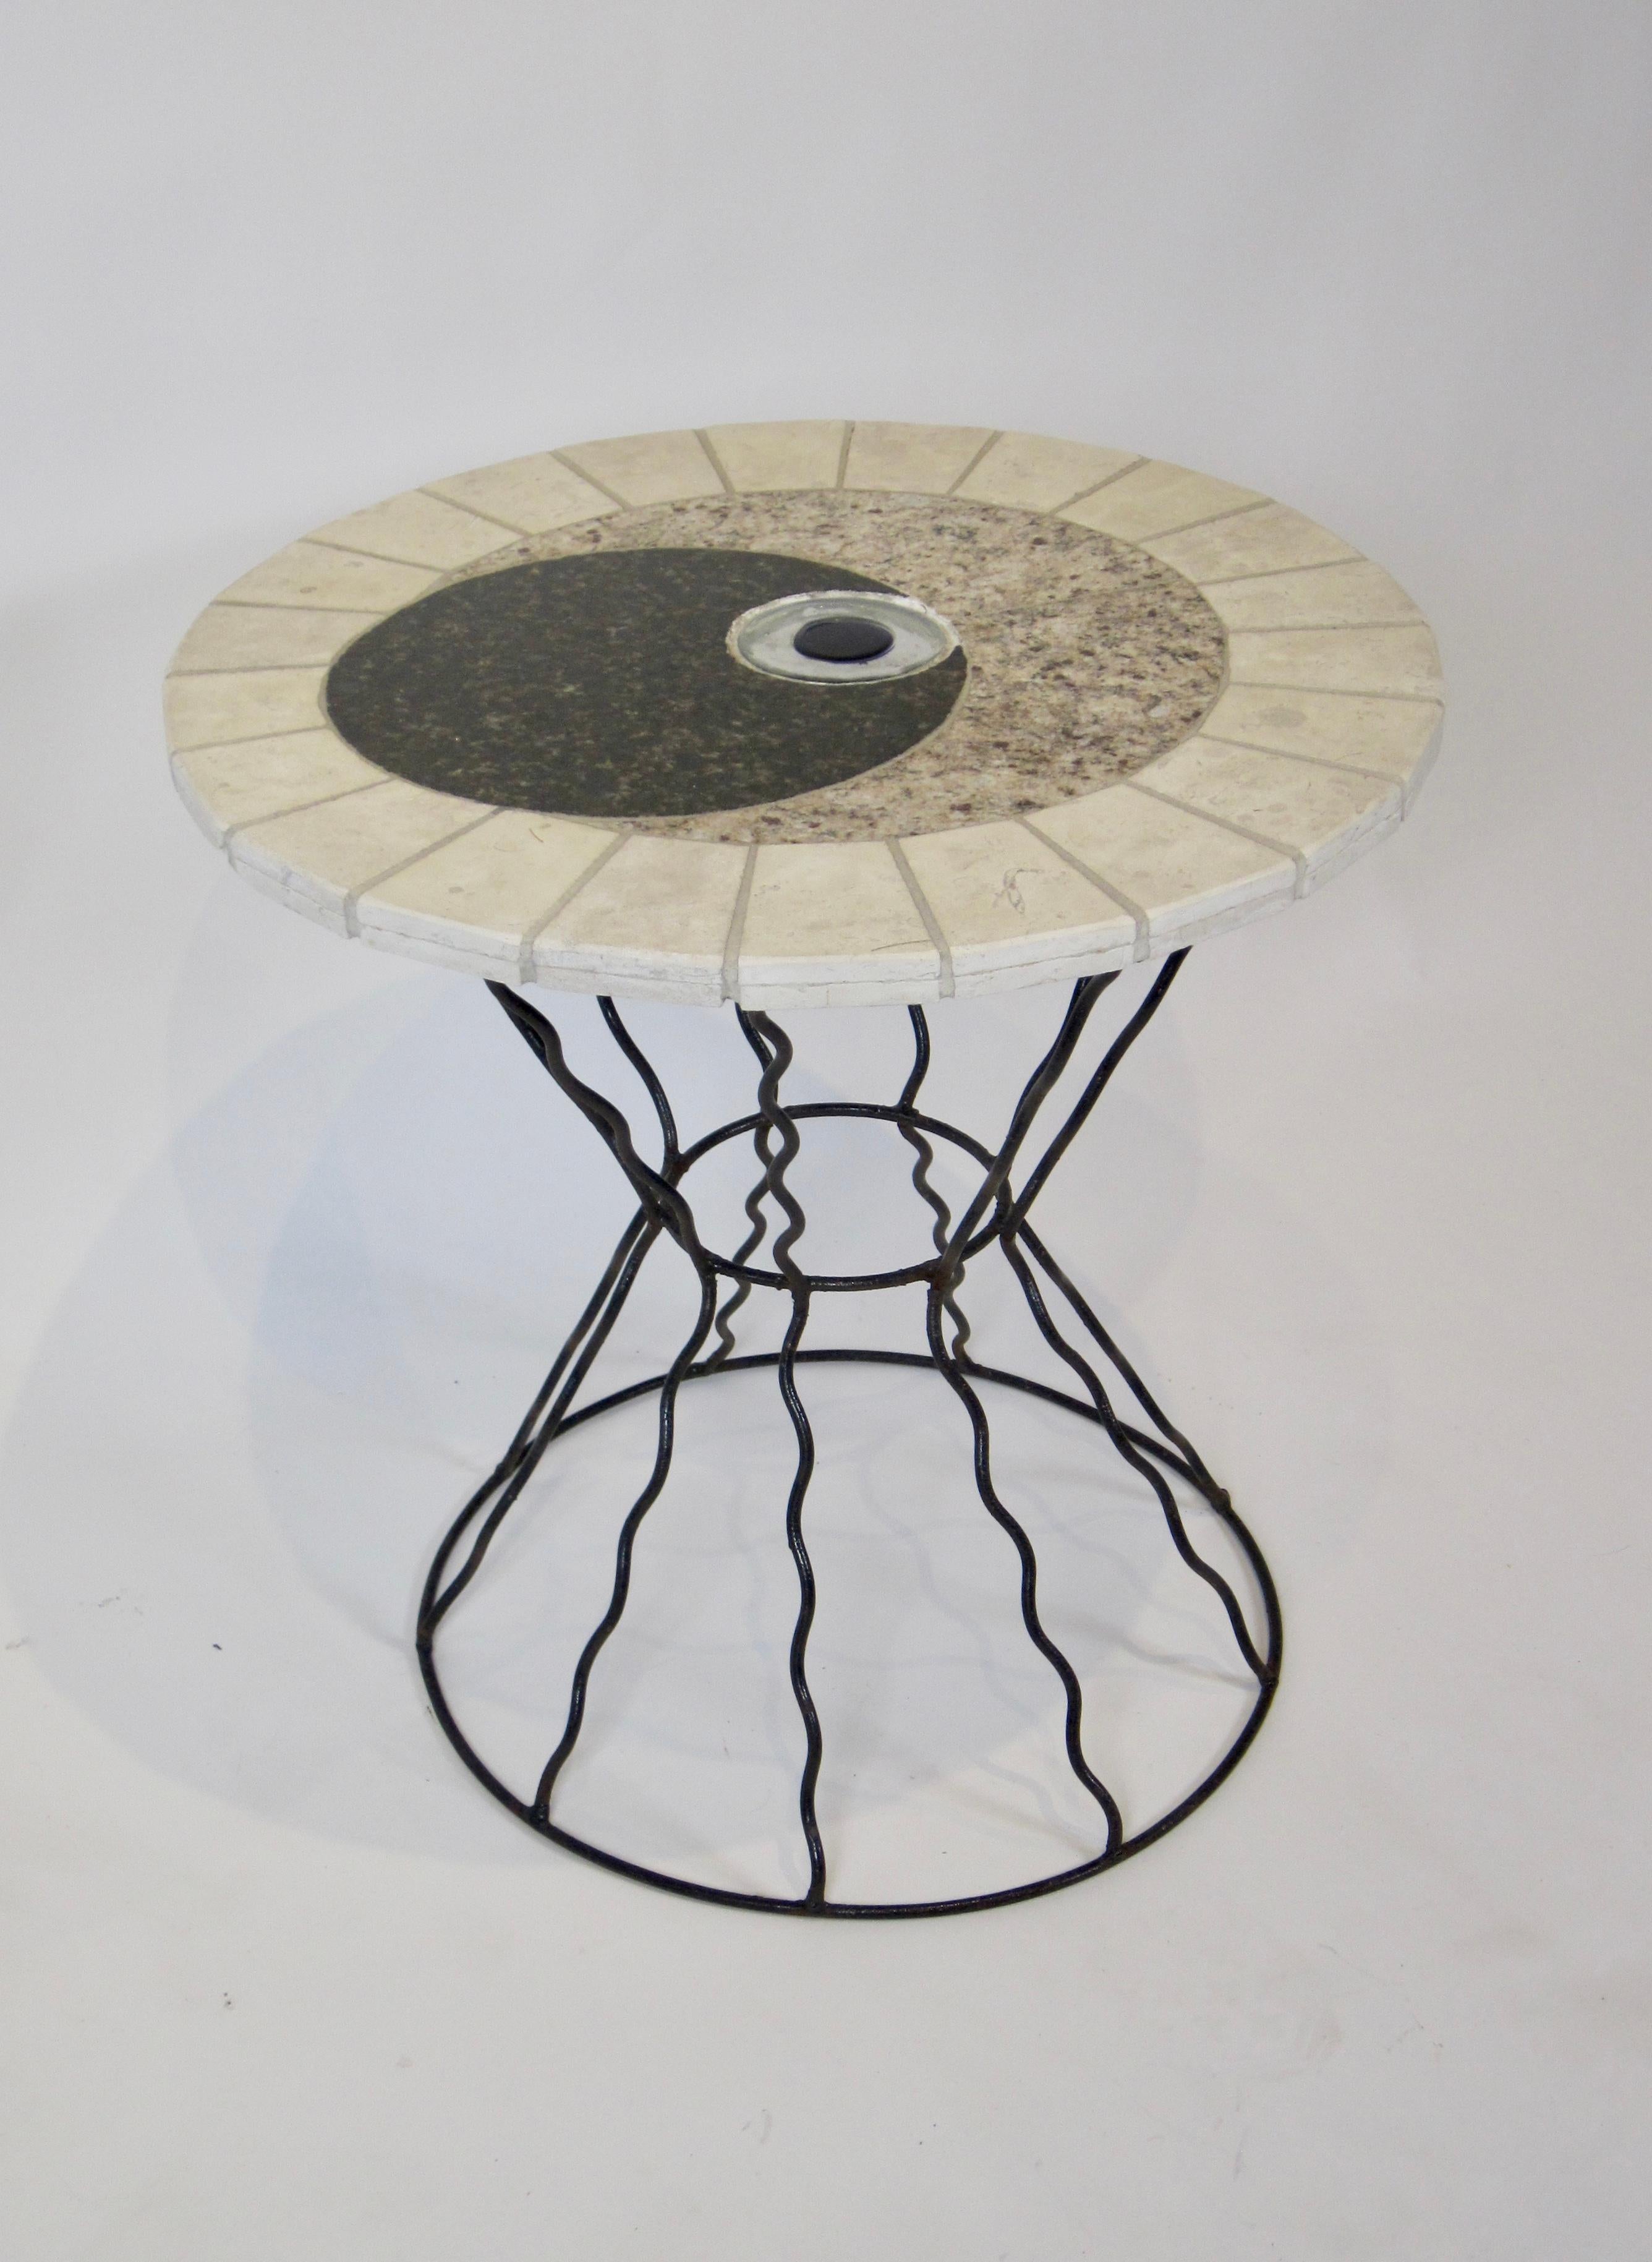 American Memphis Era Stone & Glass Table on Wrought Iron Base with Third Eye Design For Sale